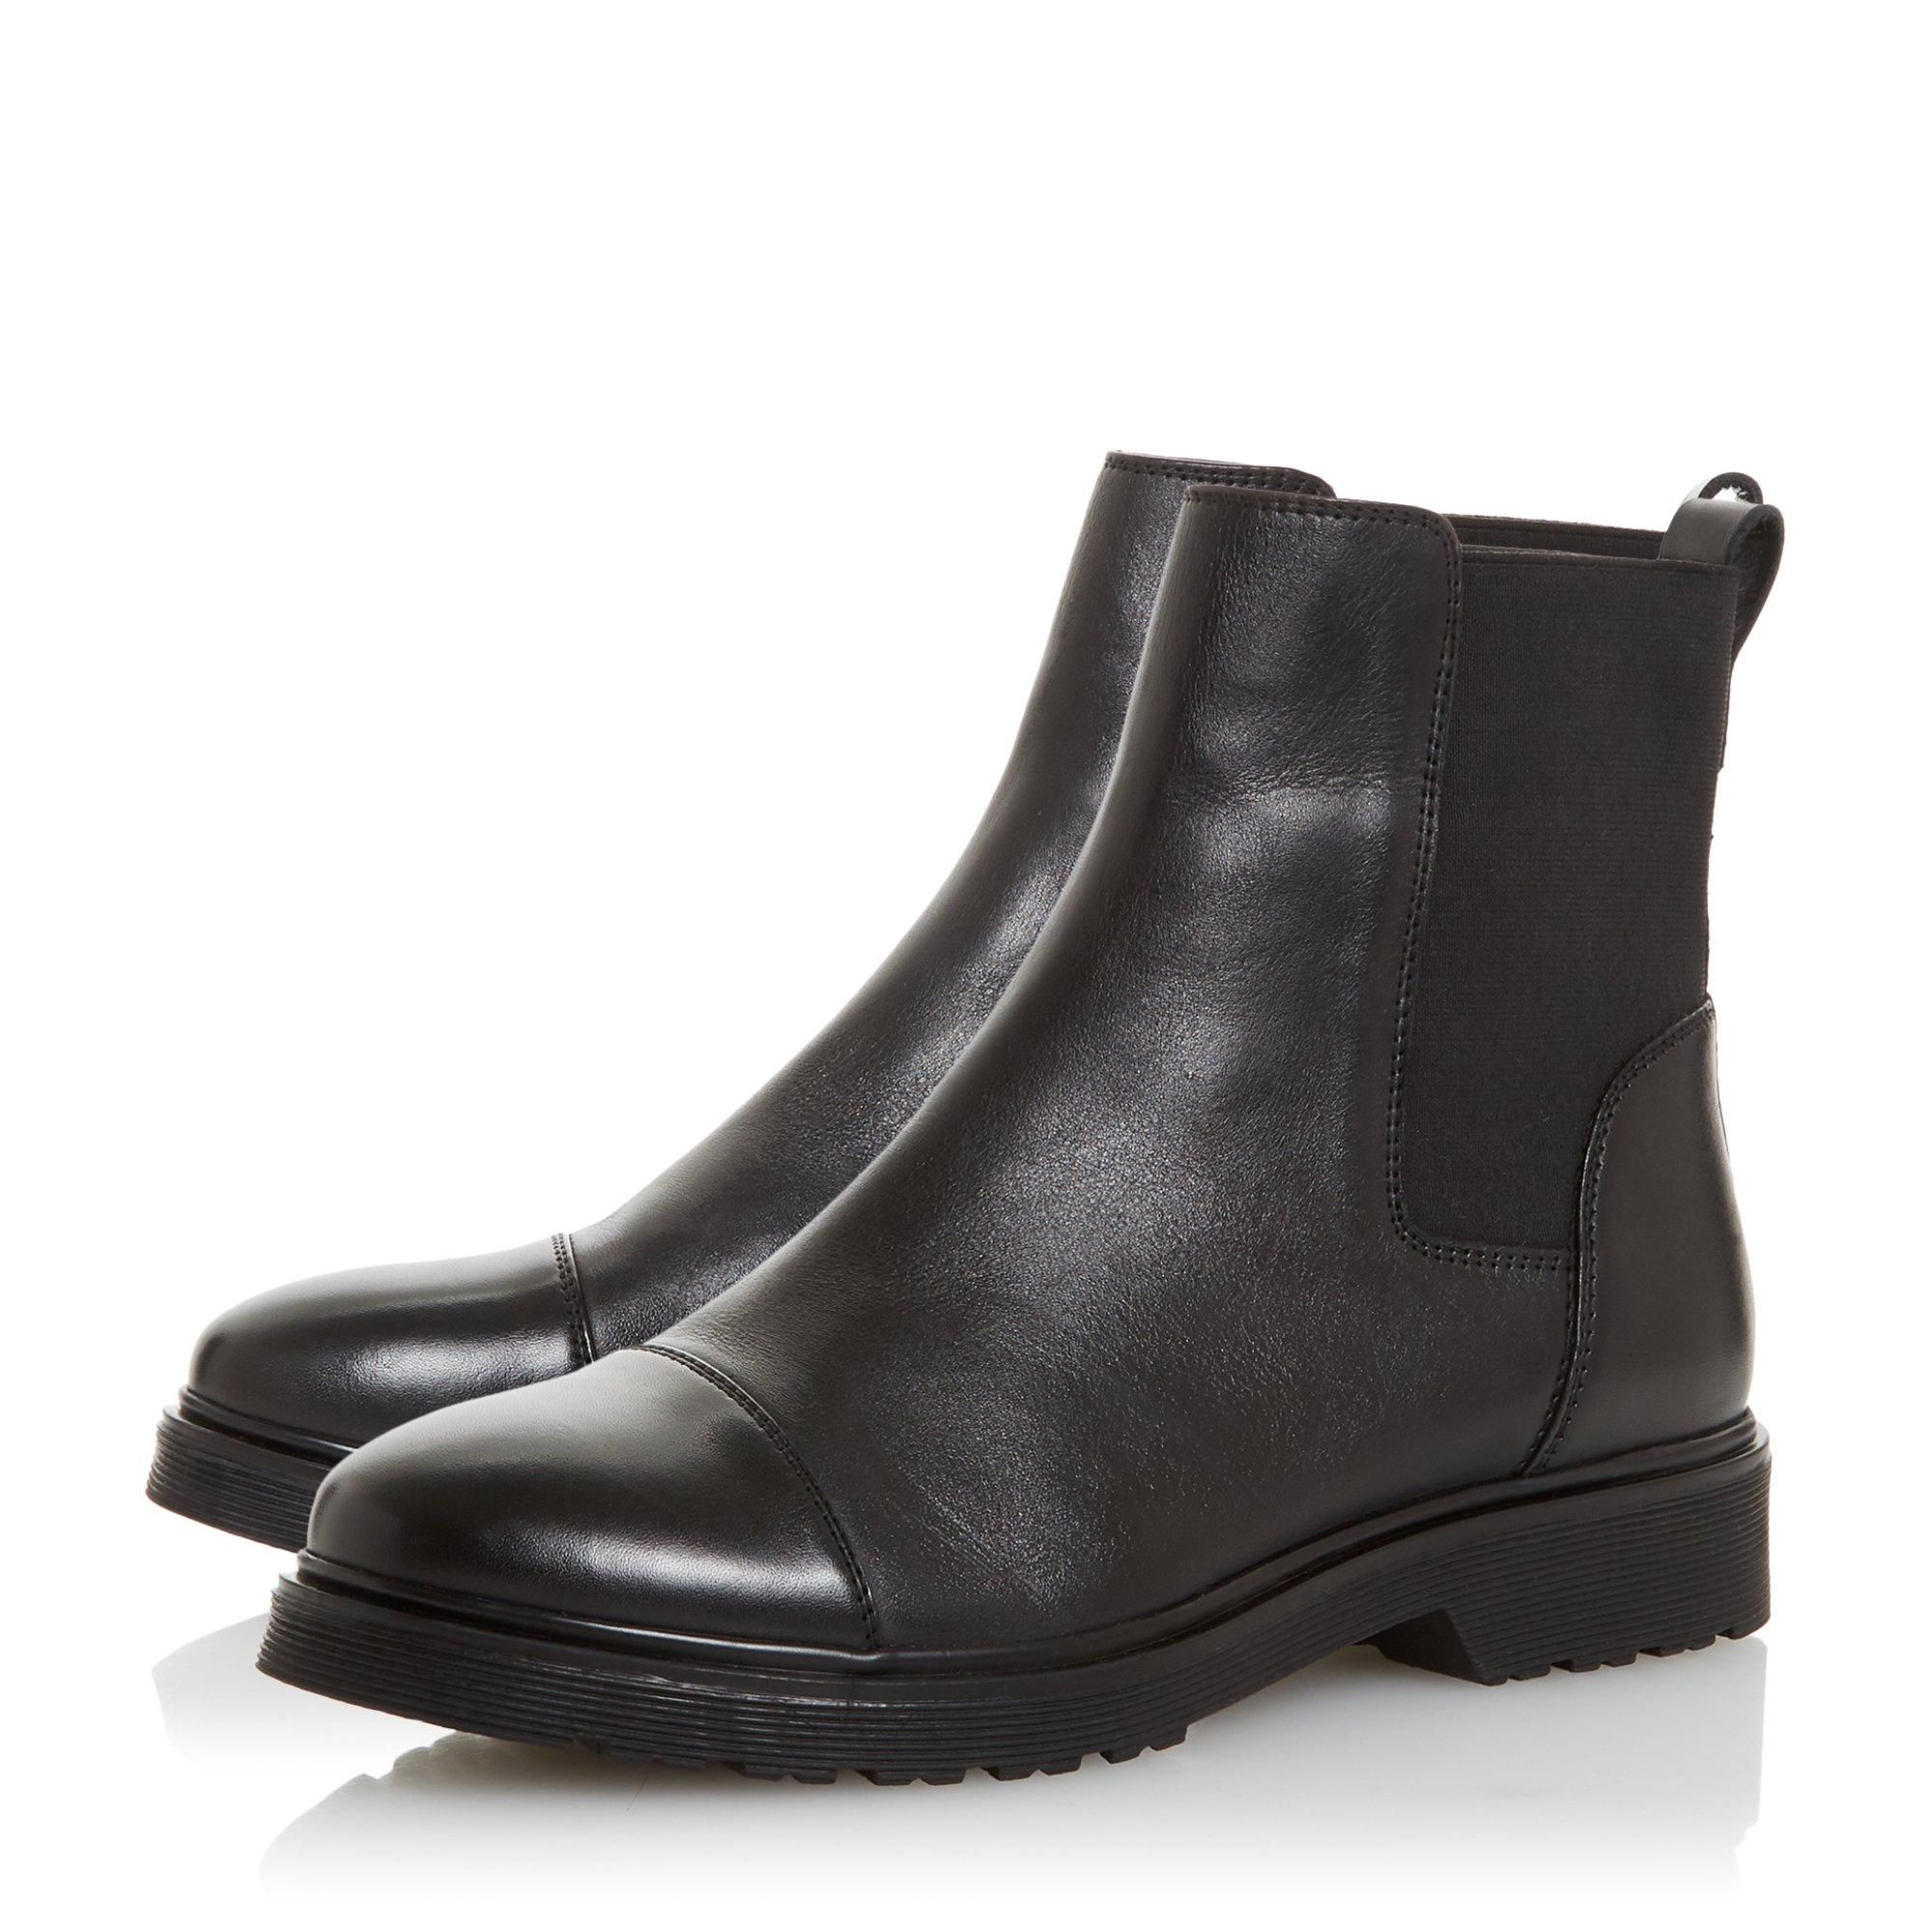 The Paysan Chelsea boot from Dune London exudes timeless appeal. Featuring elasticated inserts, pull-up tabs and a low block heel. This pull-on design is finished with a classic round toe and cleated sole.